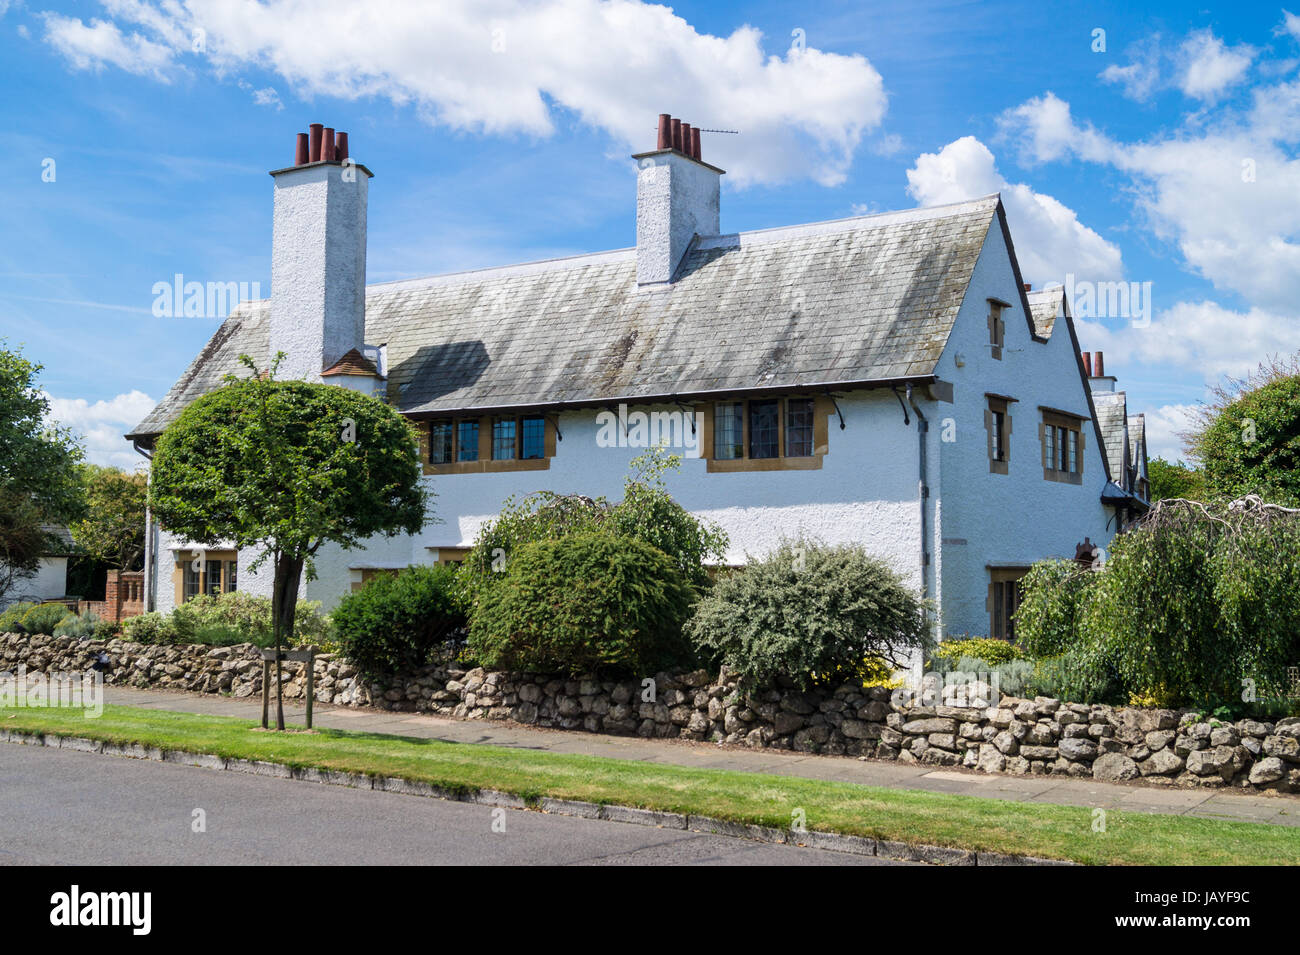 'The Homestead', Arts and Crafts style house by Charles Francis Annesley Voysey (1857-1941), 1905, Frinton-on Sea, Essex, England Stock Photo